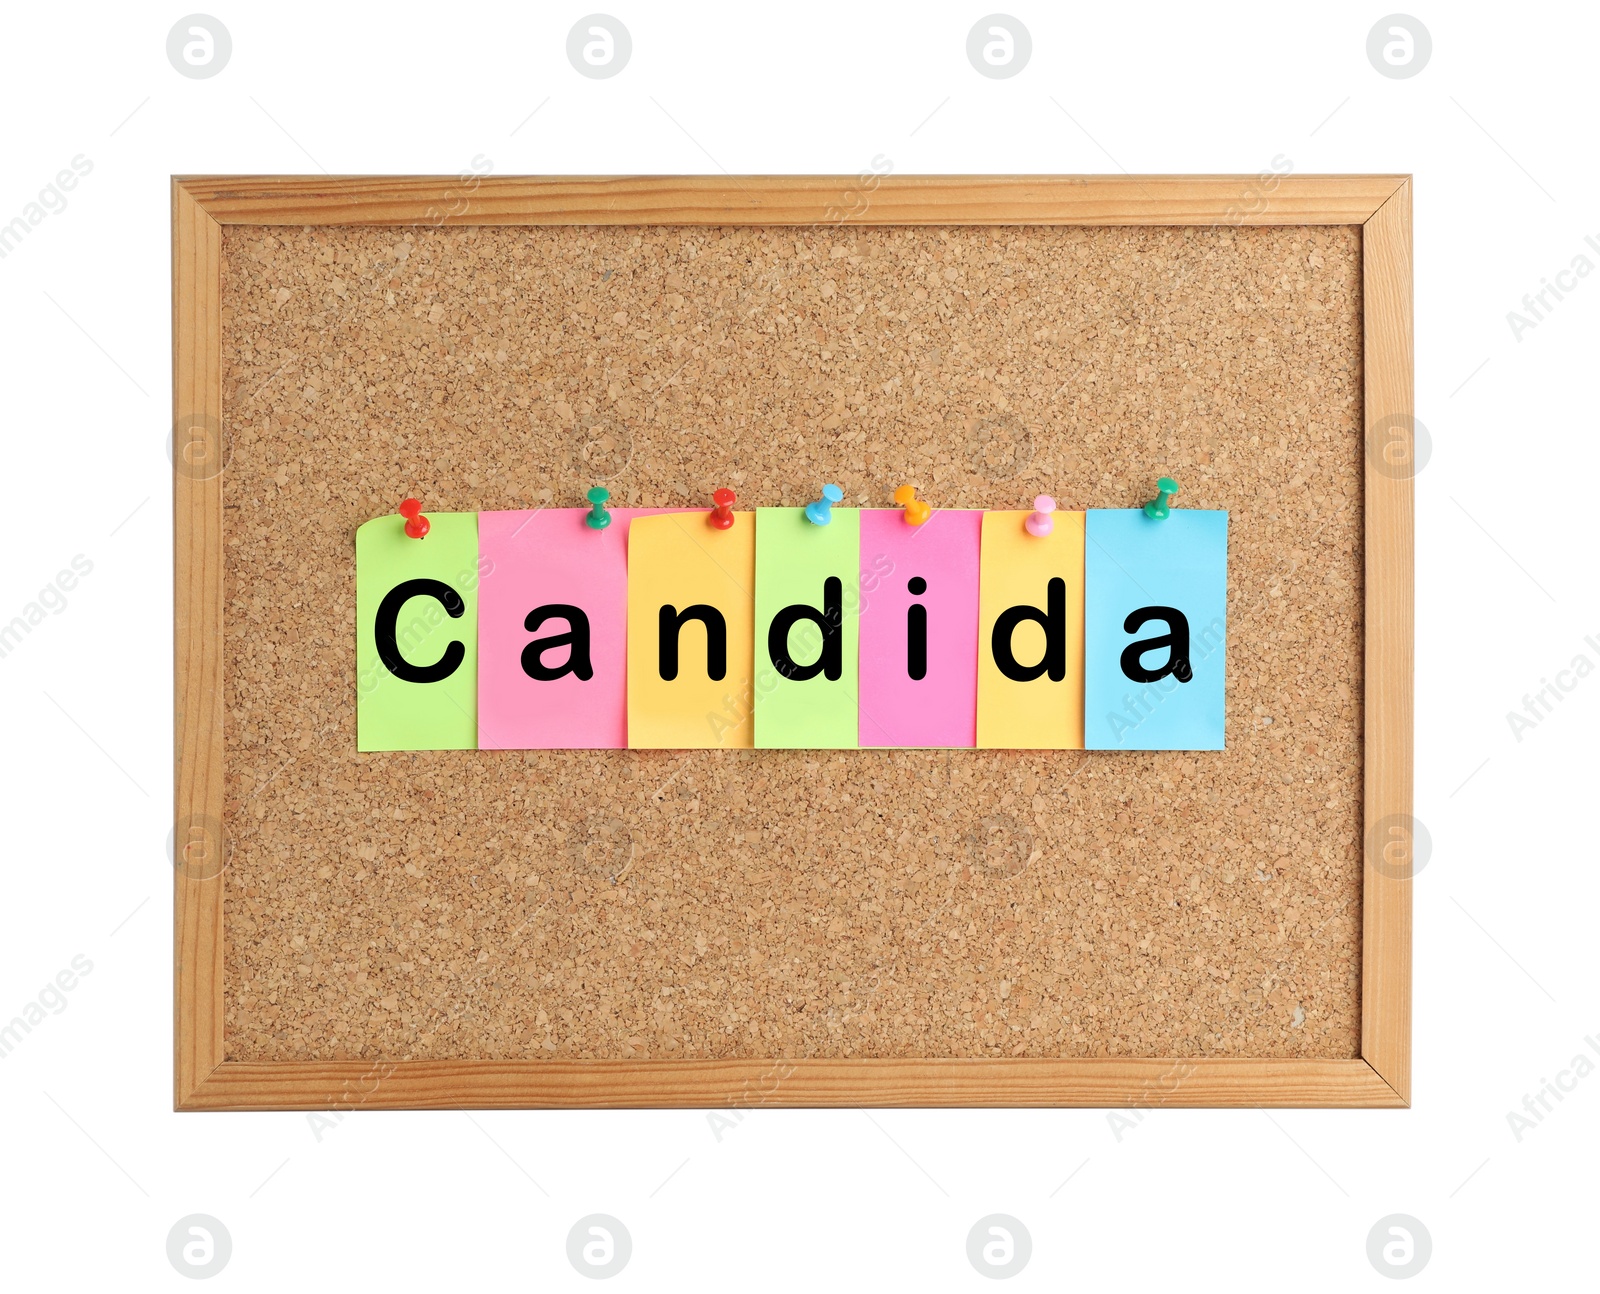 Image of Cork board with word Candida made of colorful notes on white background